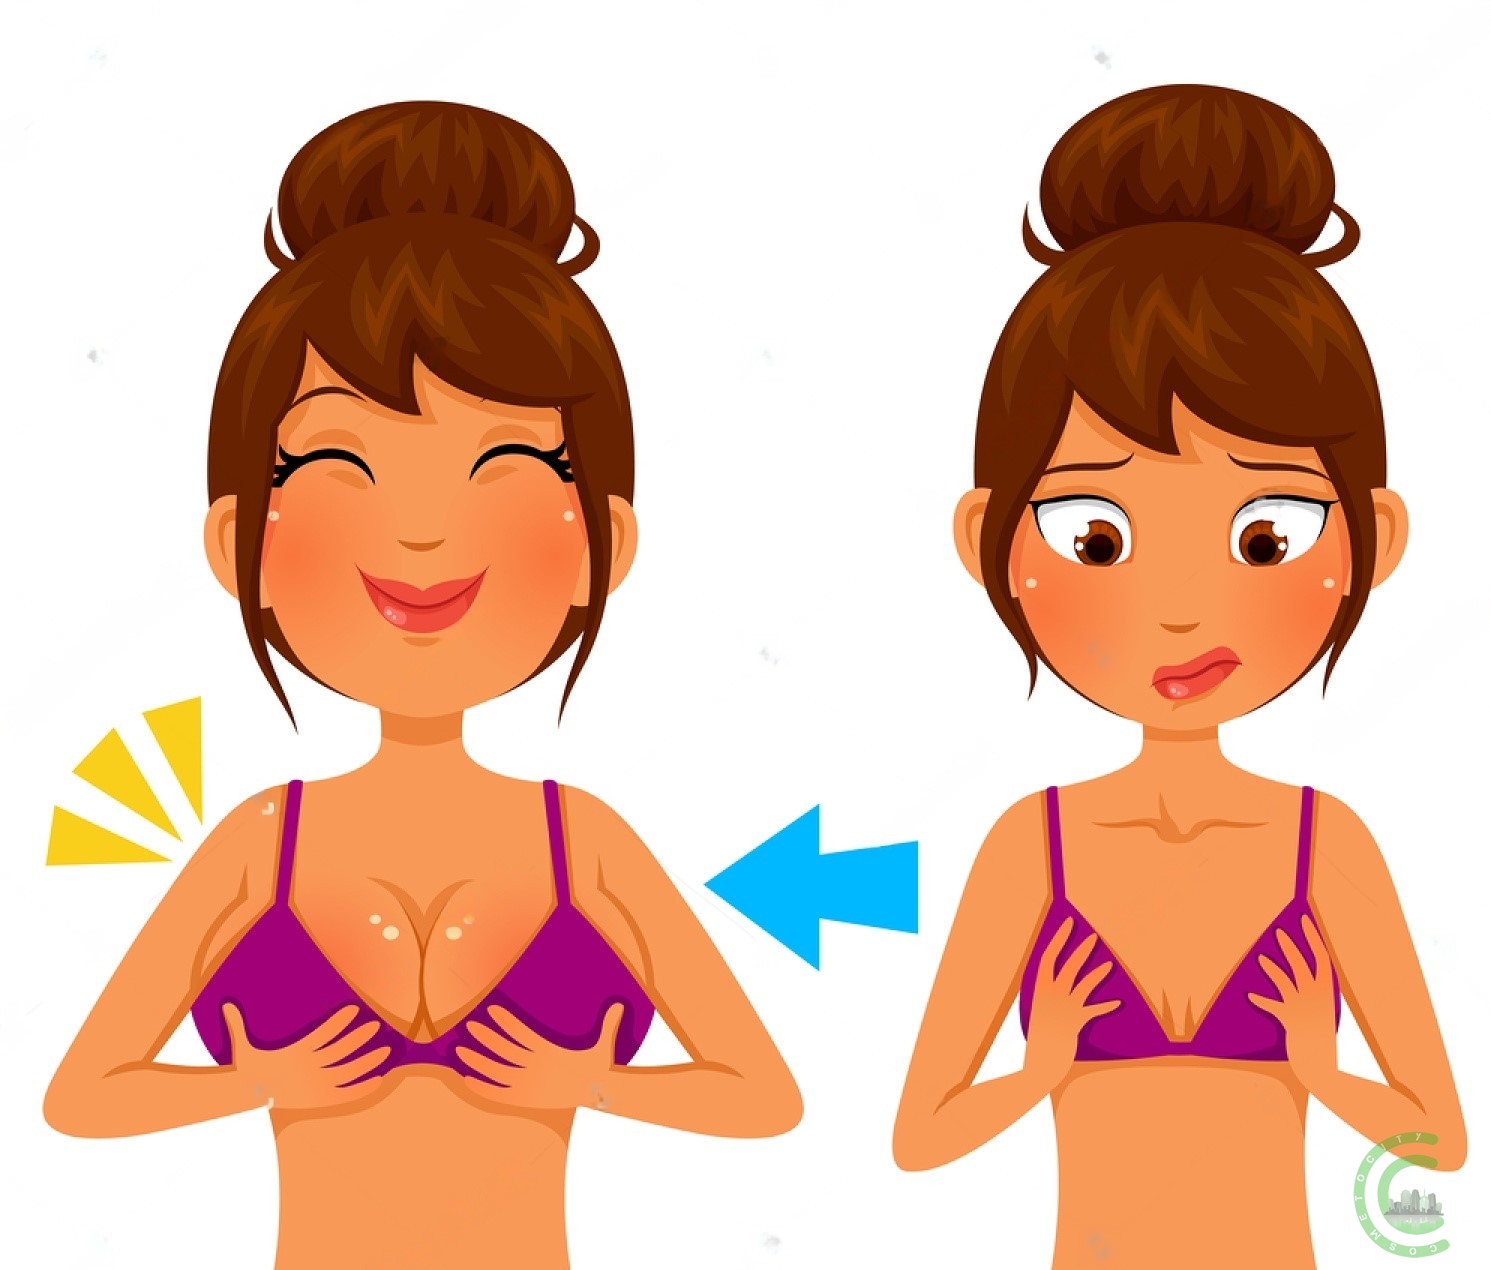 Breast Lift Surgery: An Overview